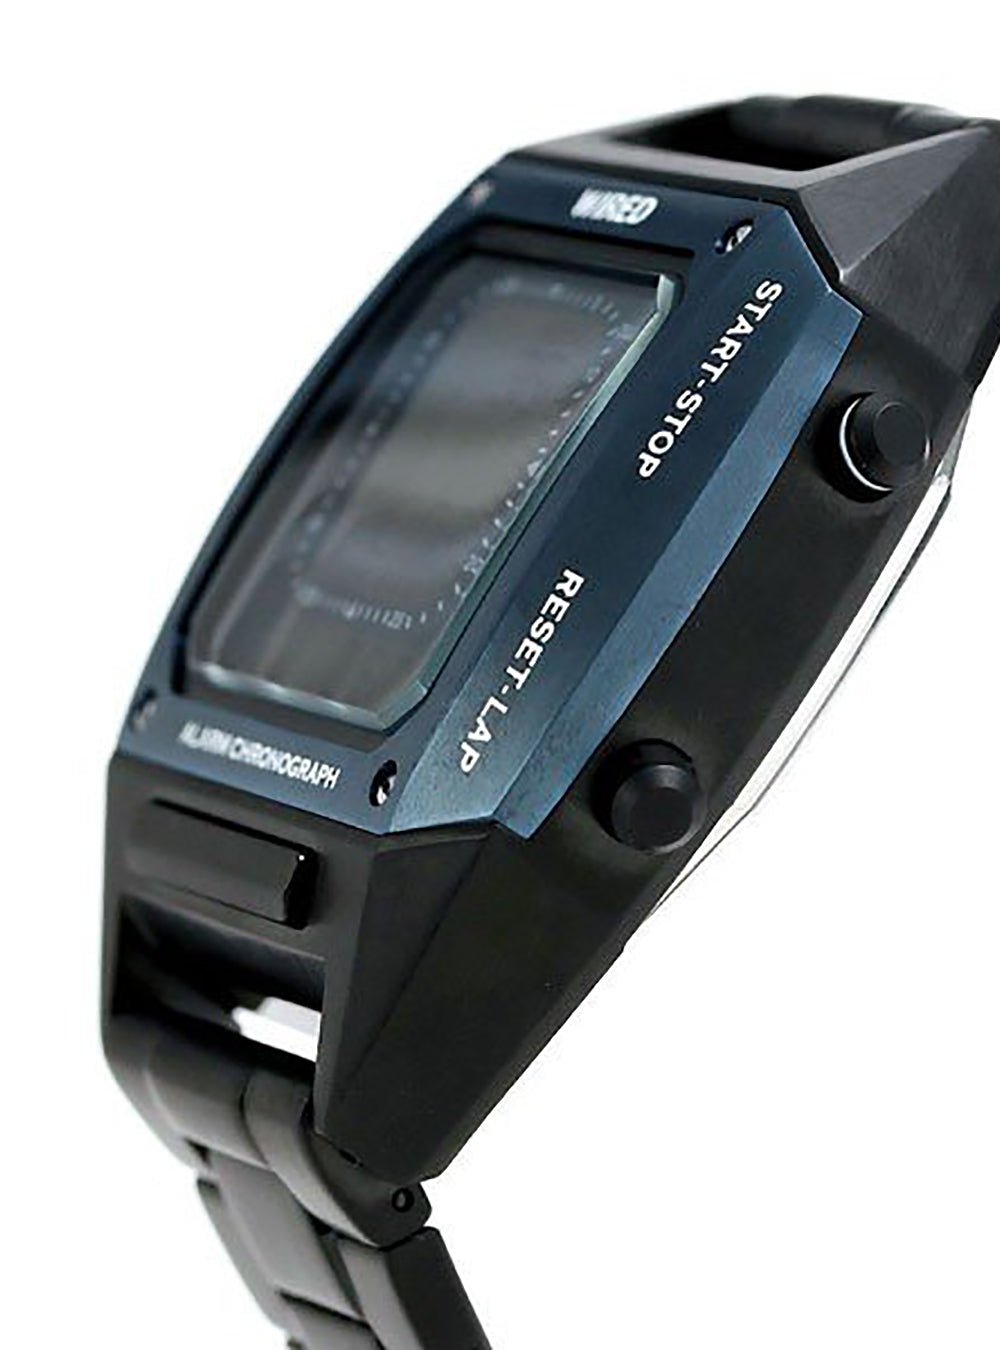 Used Seiko WIRED watch ($48) for sale - Timepeaks